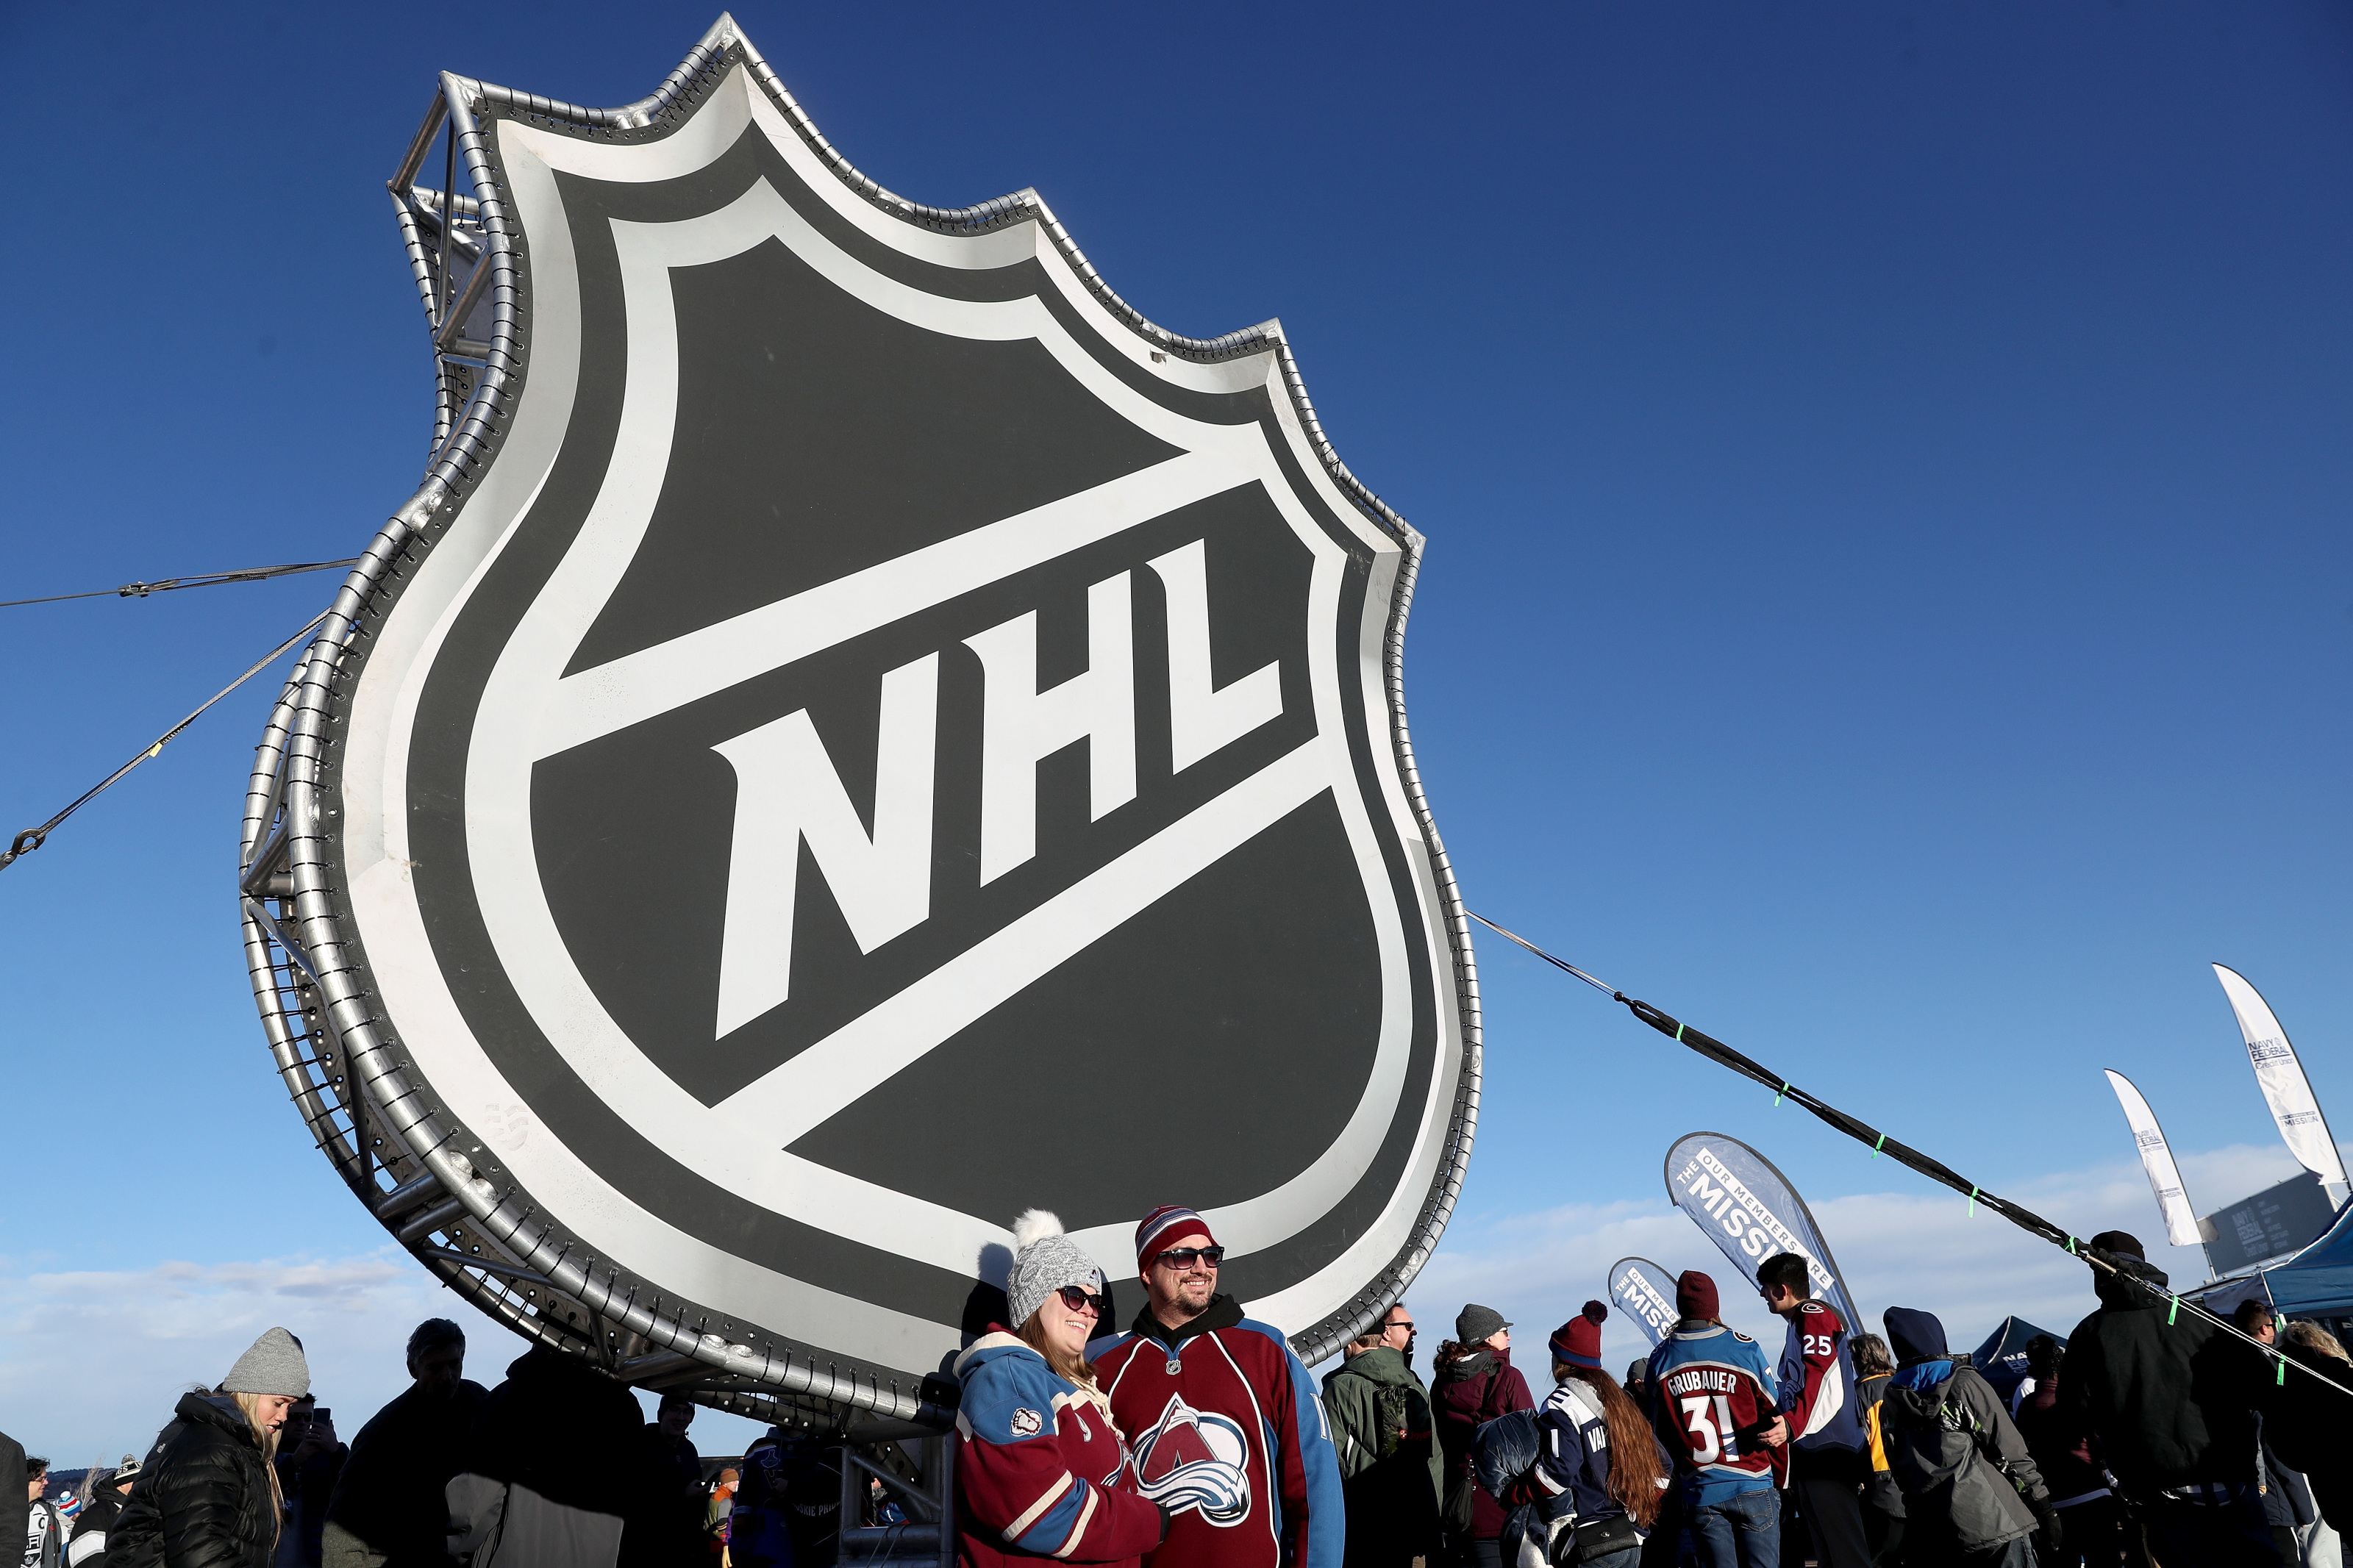 Avalanche announced as host of 2020 Stadium Series in Colorado Springs -  Mile High Hockey